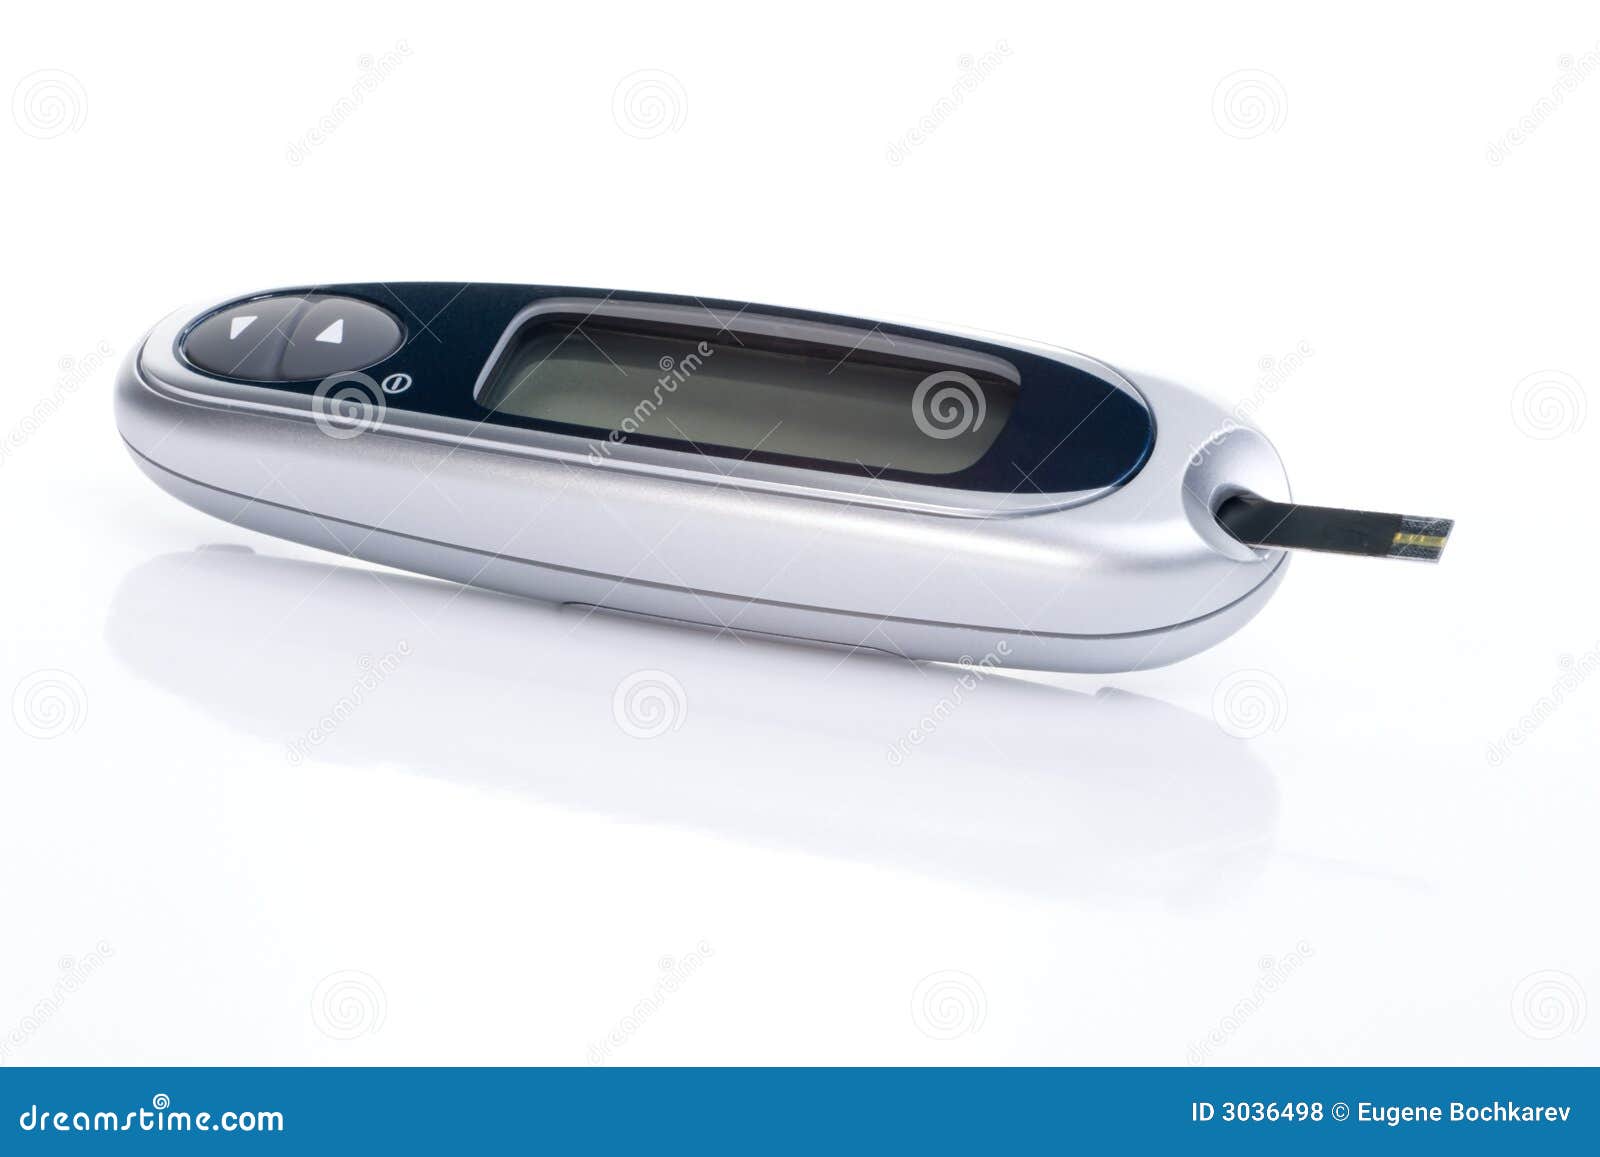 clipart blood glucose monitor - photo #40